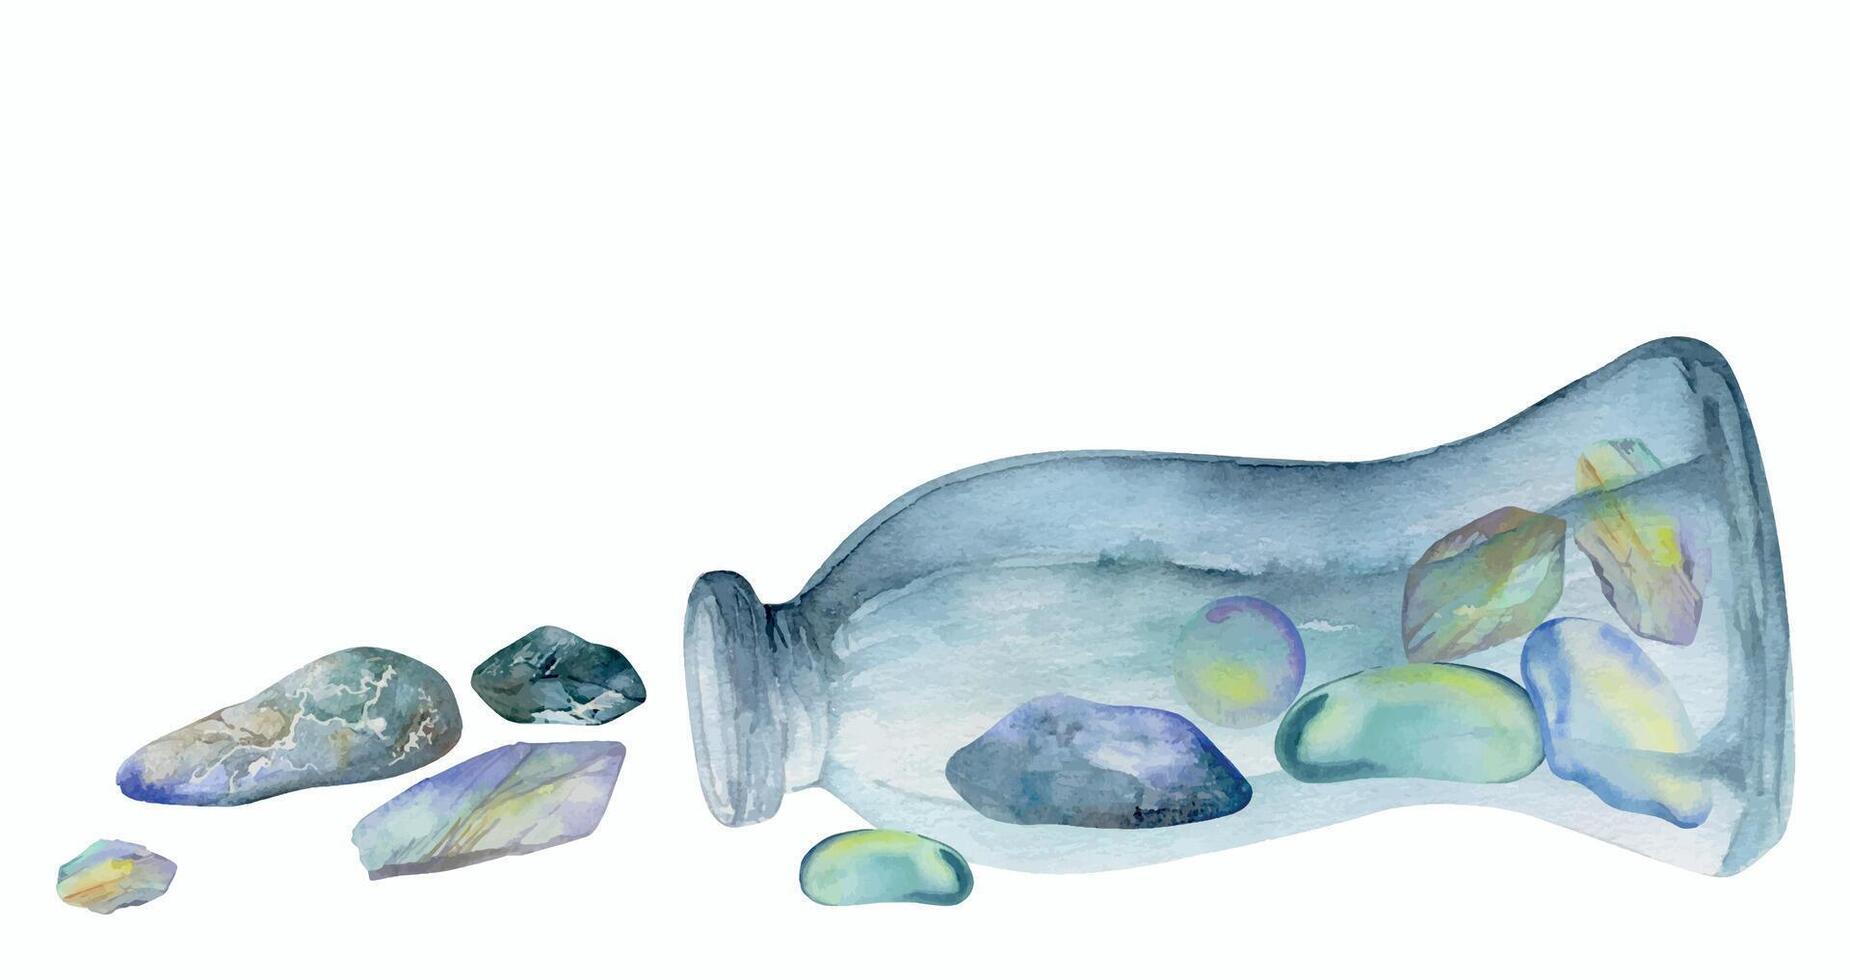 Hand drawn watercolor illustration sea witch altar objects. Glass vial jar bottle gems precious stones. Composition isolated on white background. Design print, shop, magic, medicine, chemistry alchemy vector